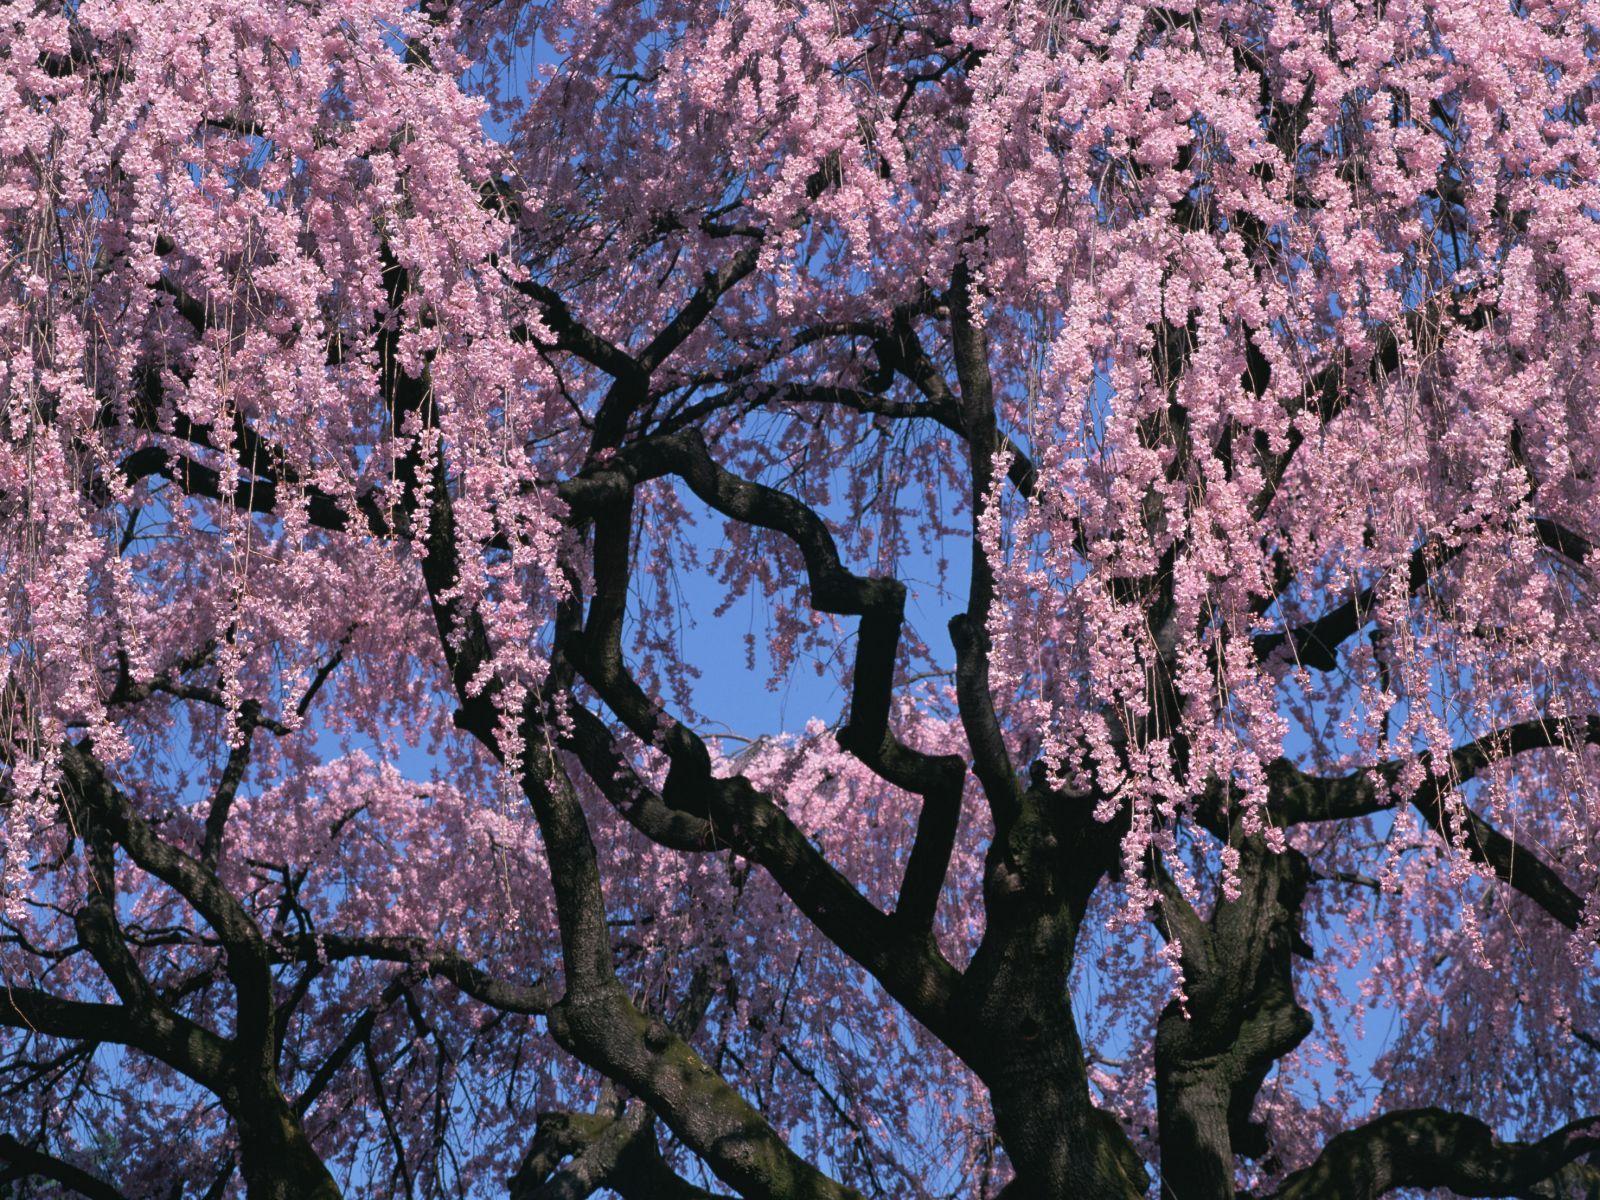 Japanese Cherry Blossom Tree Wallpapers - Top Free Japanese Cherry